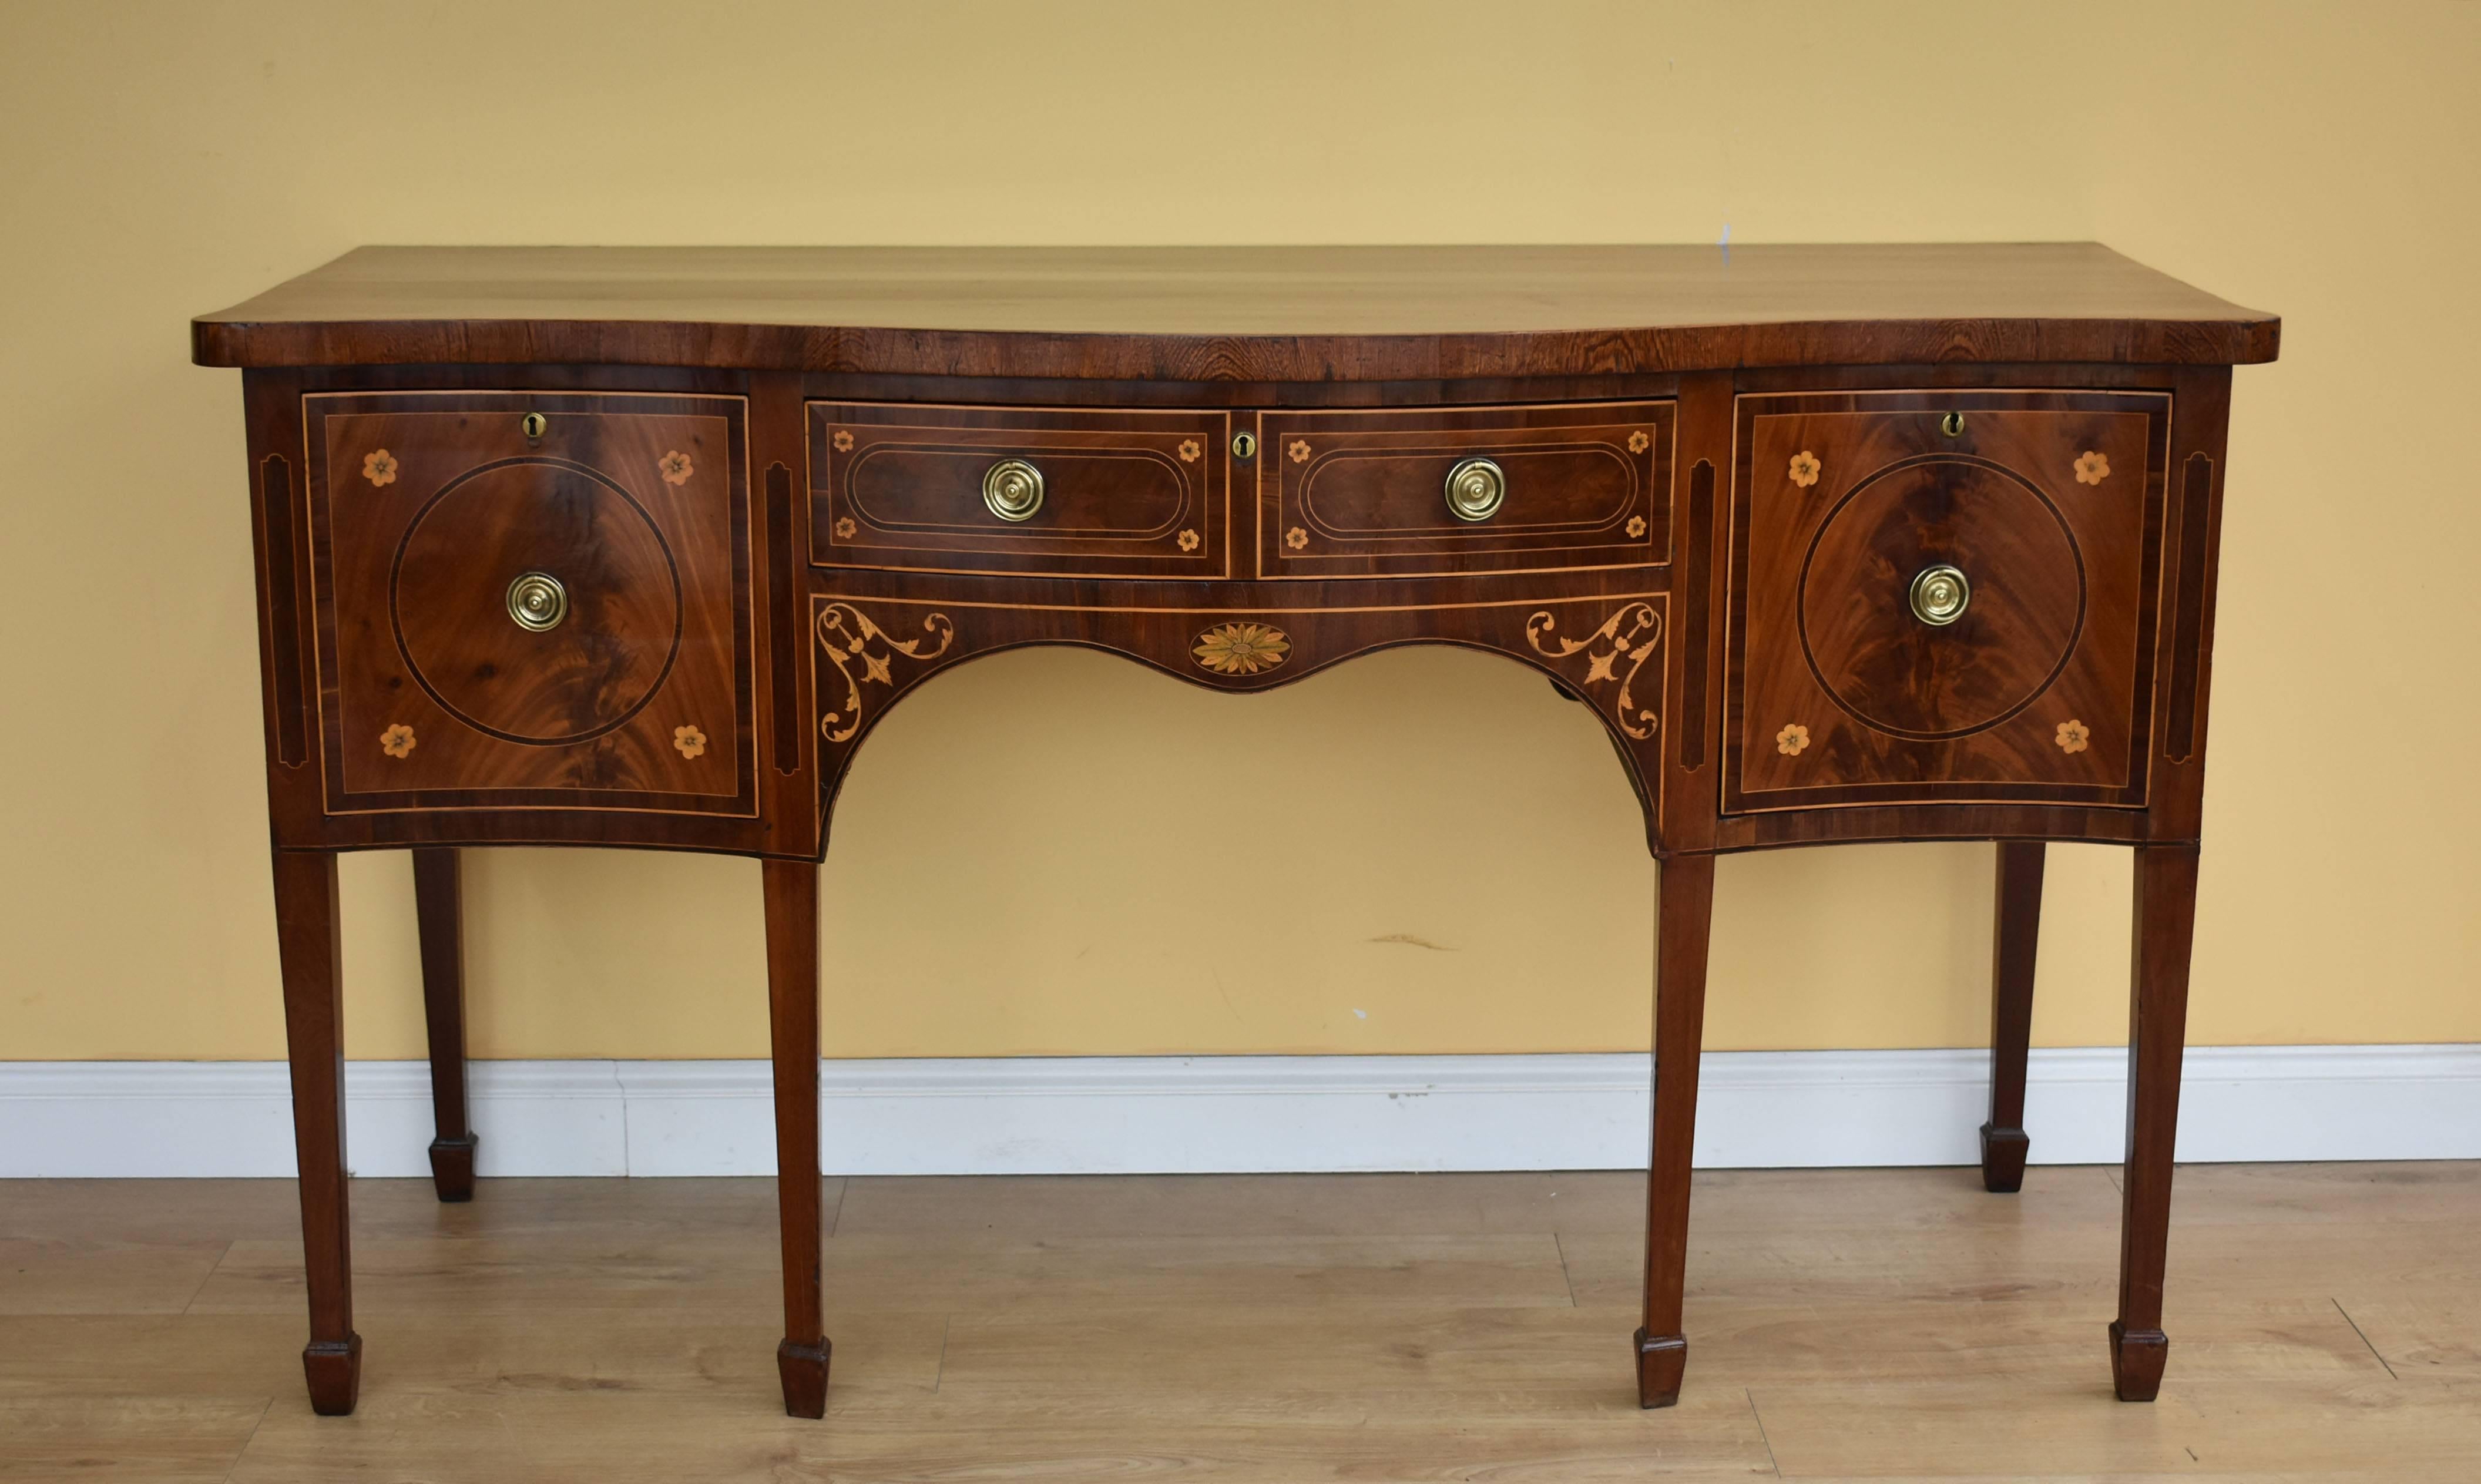 For sale is a fine quality George III mahogany and inlaid serpentine sideboard. The top with broad zebra wood banding above three drawers, each with strung decoration and flower head inlays. The right hand drawer has its original cellaret, over six